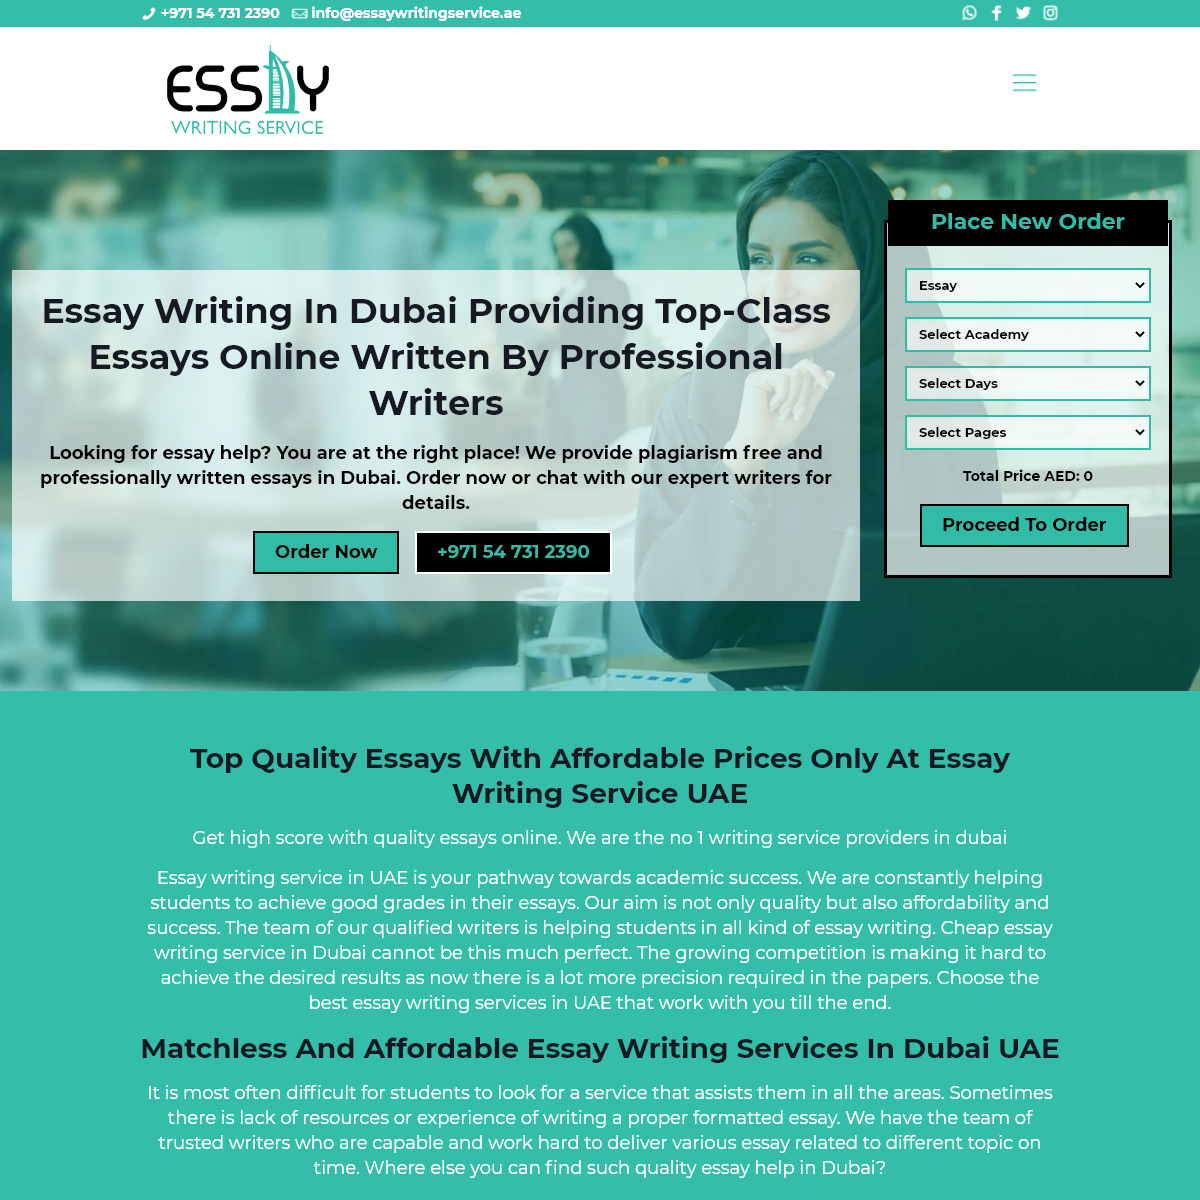 A complete backup of essaywritingservice.ae